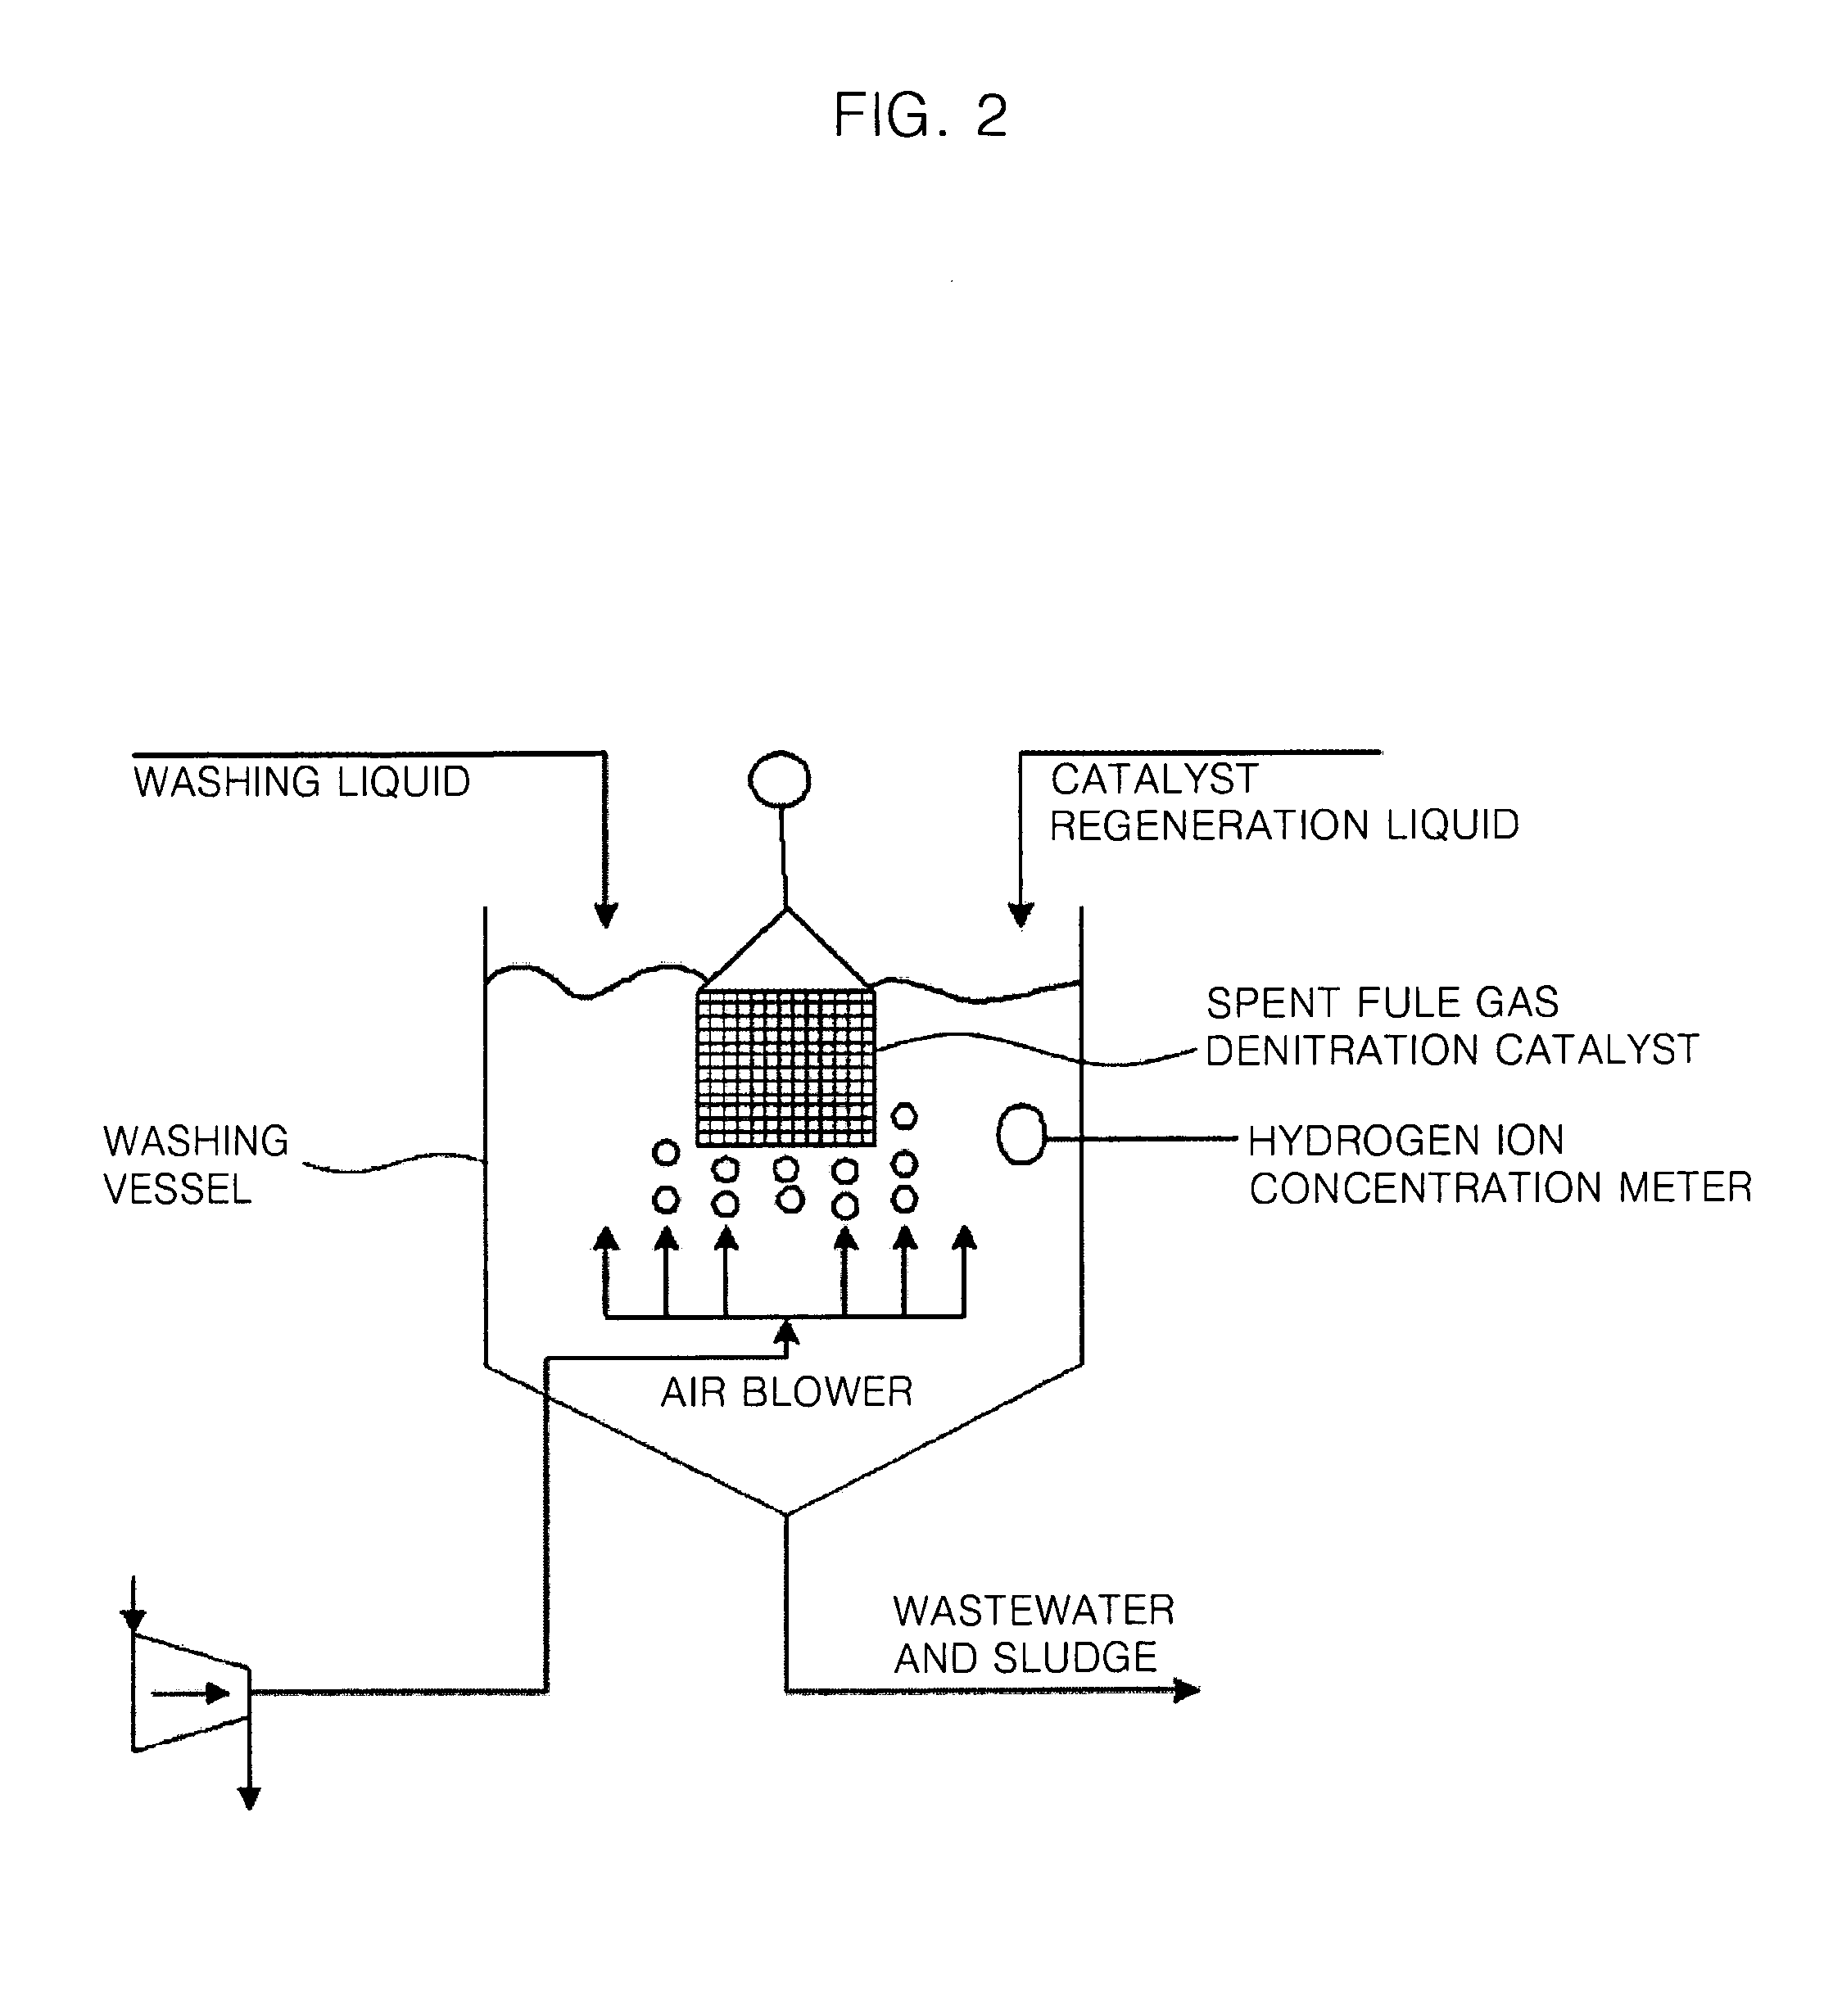 Method of recycling spent flue gas denitration catalyst and method of determining washing time of spent flue gas denitration catalyst